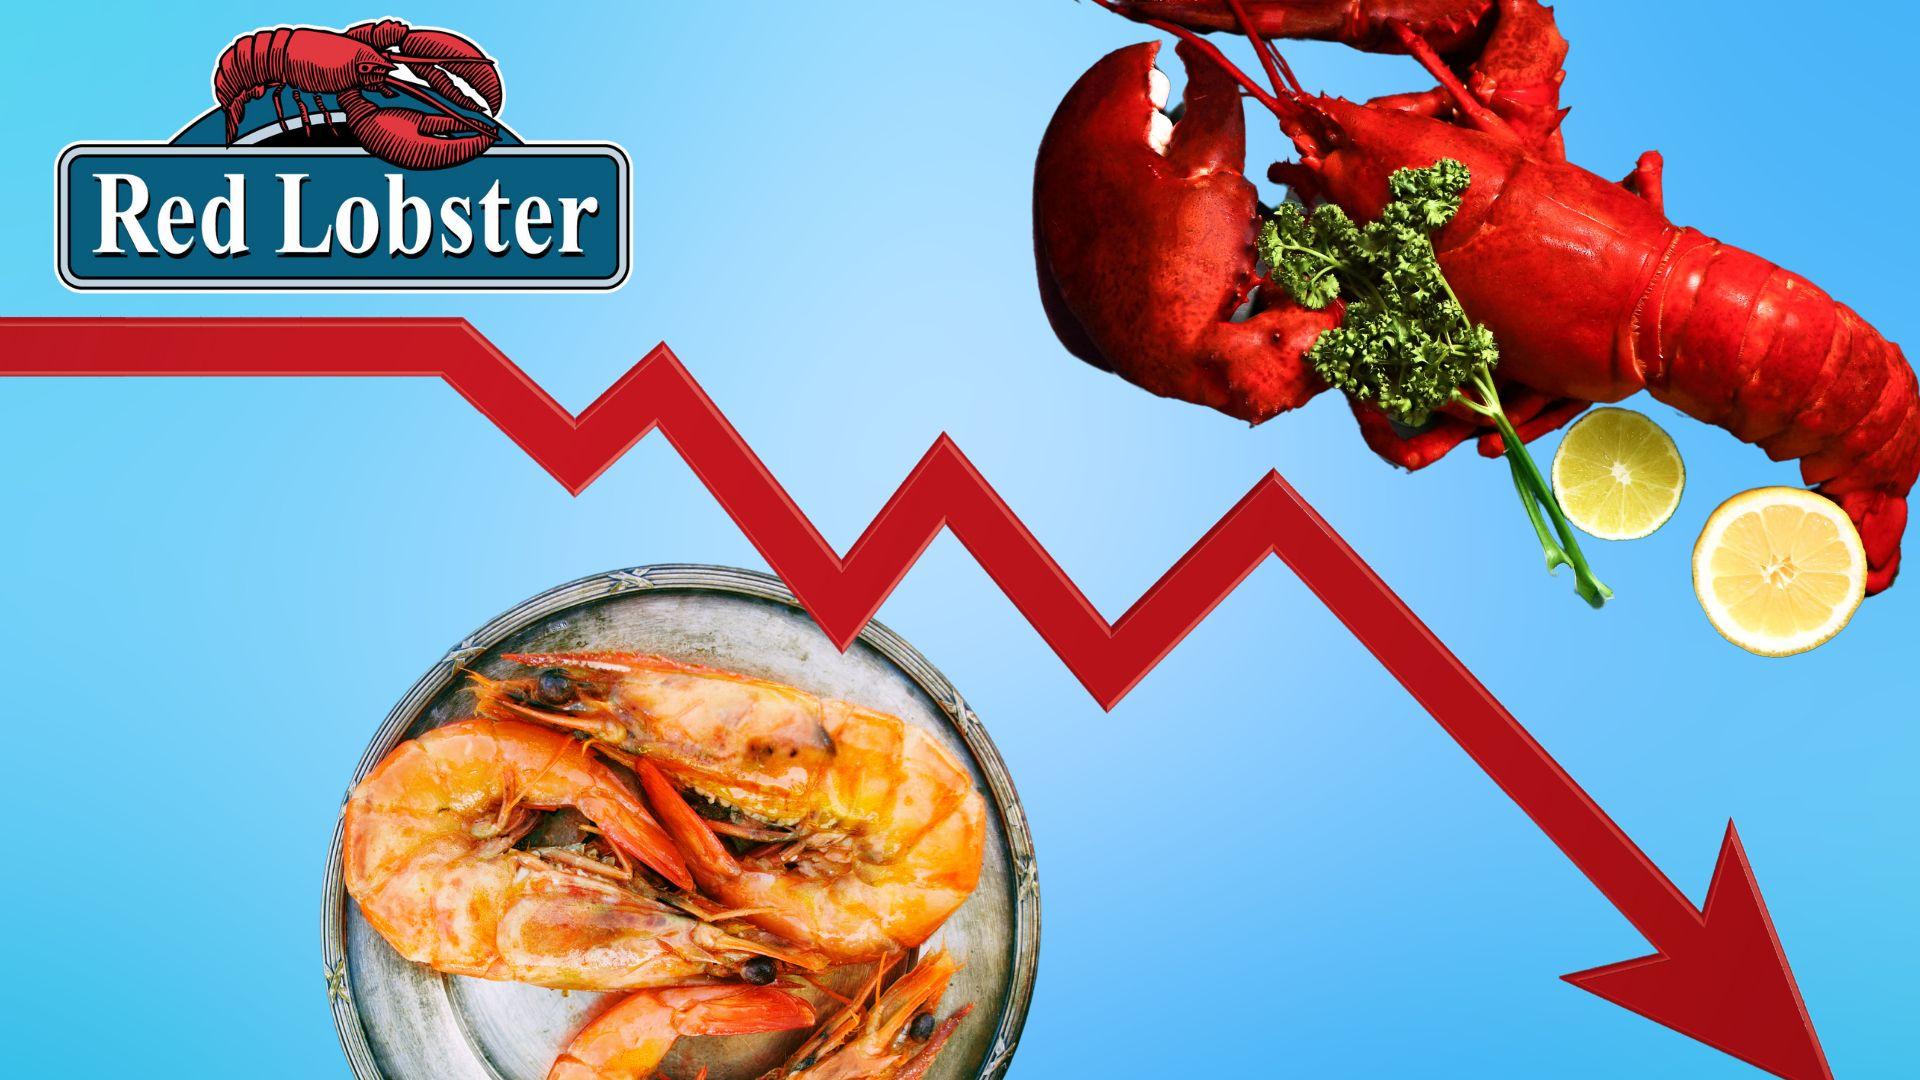 Red Lobster is in decline